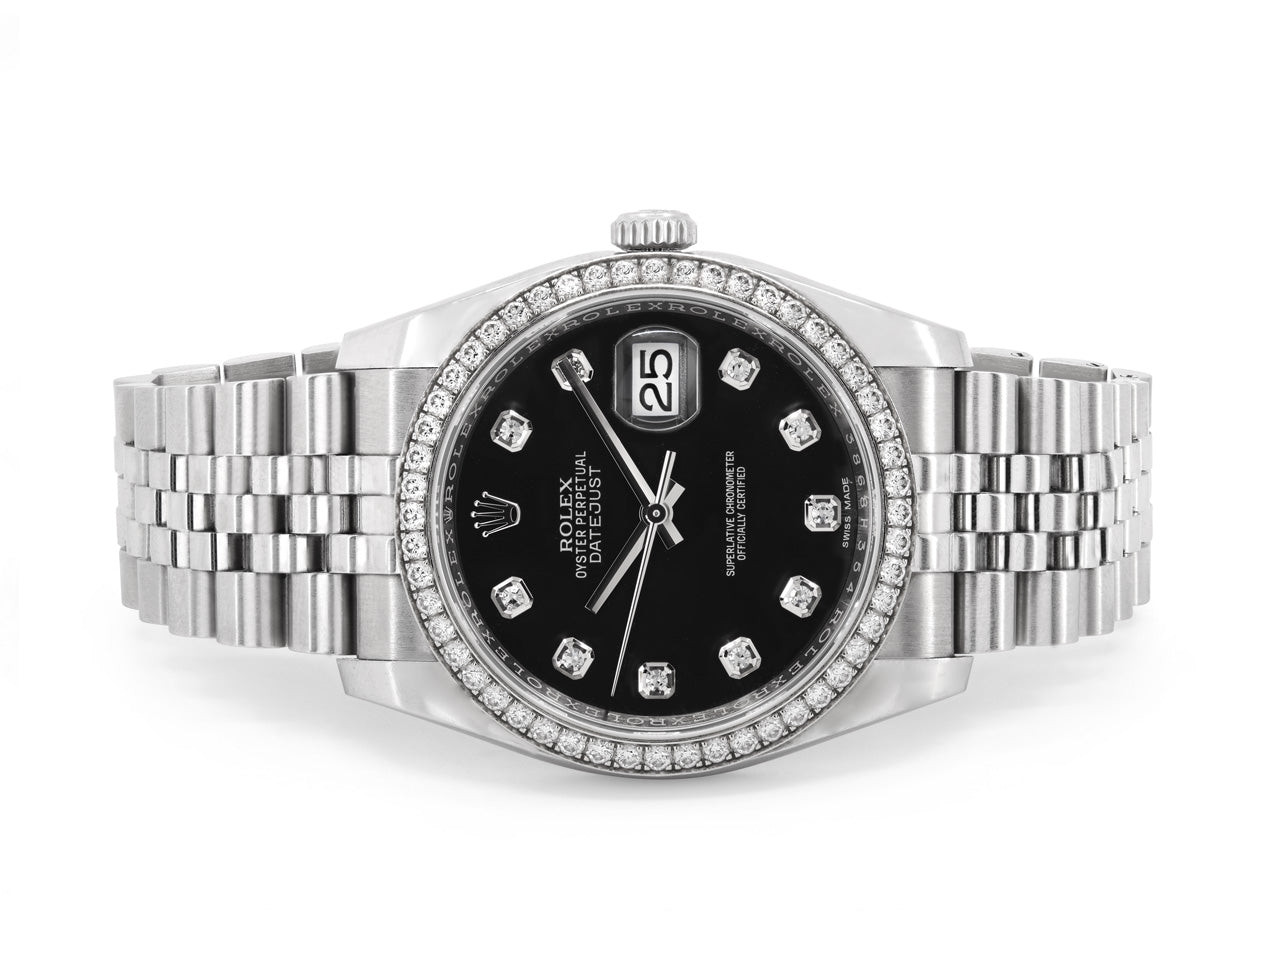 Rolex 'Datejust' 36 in Steel, with Diamond Bezel and Dial